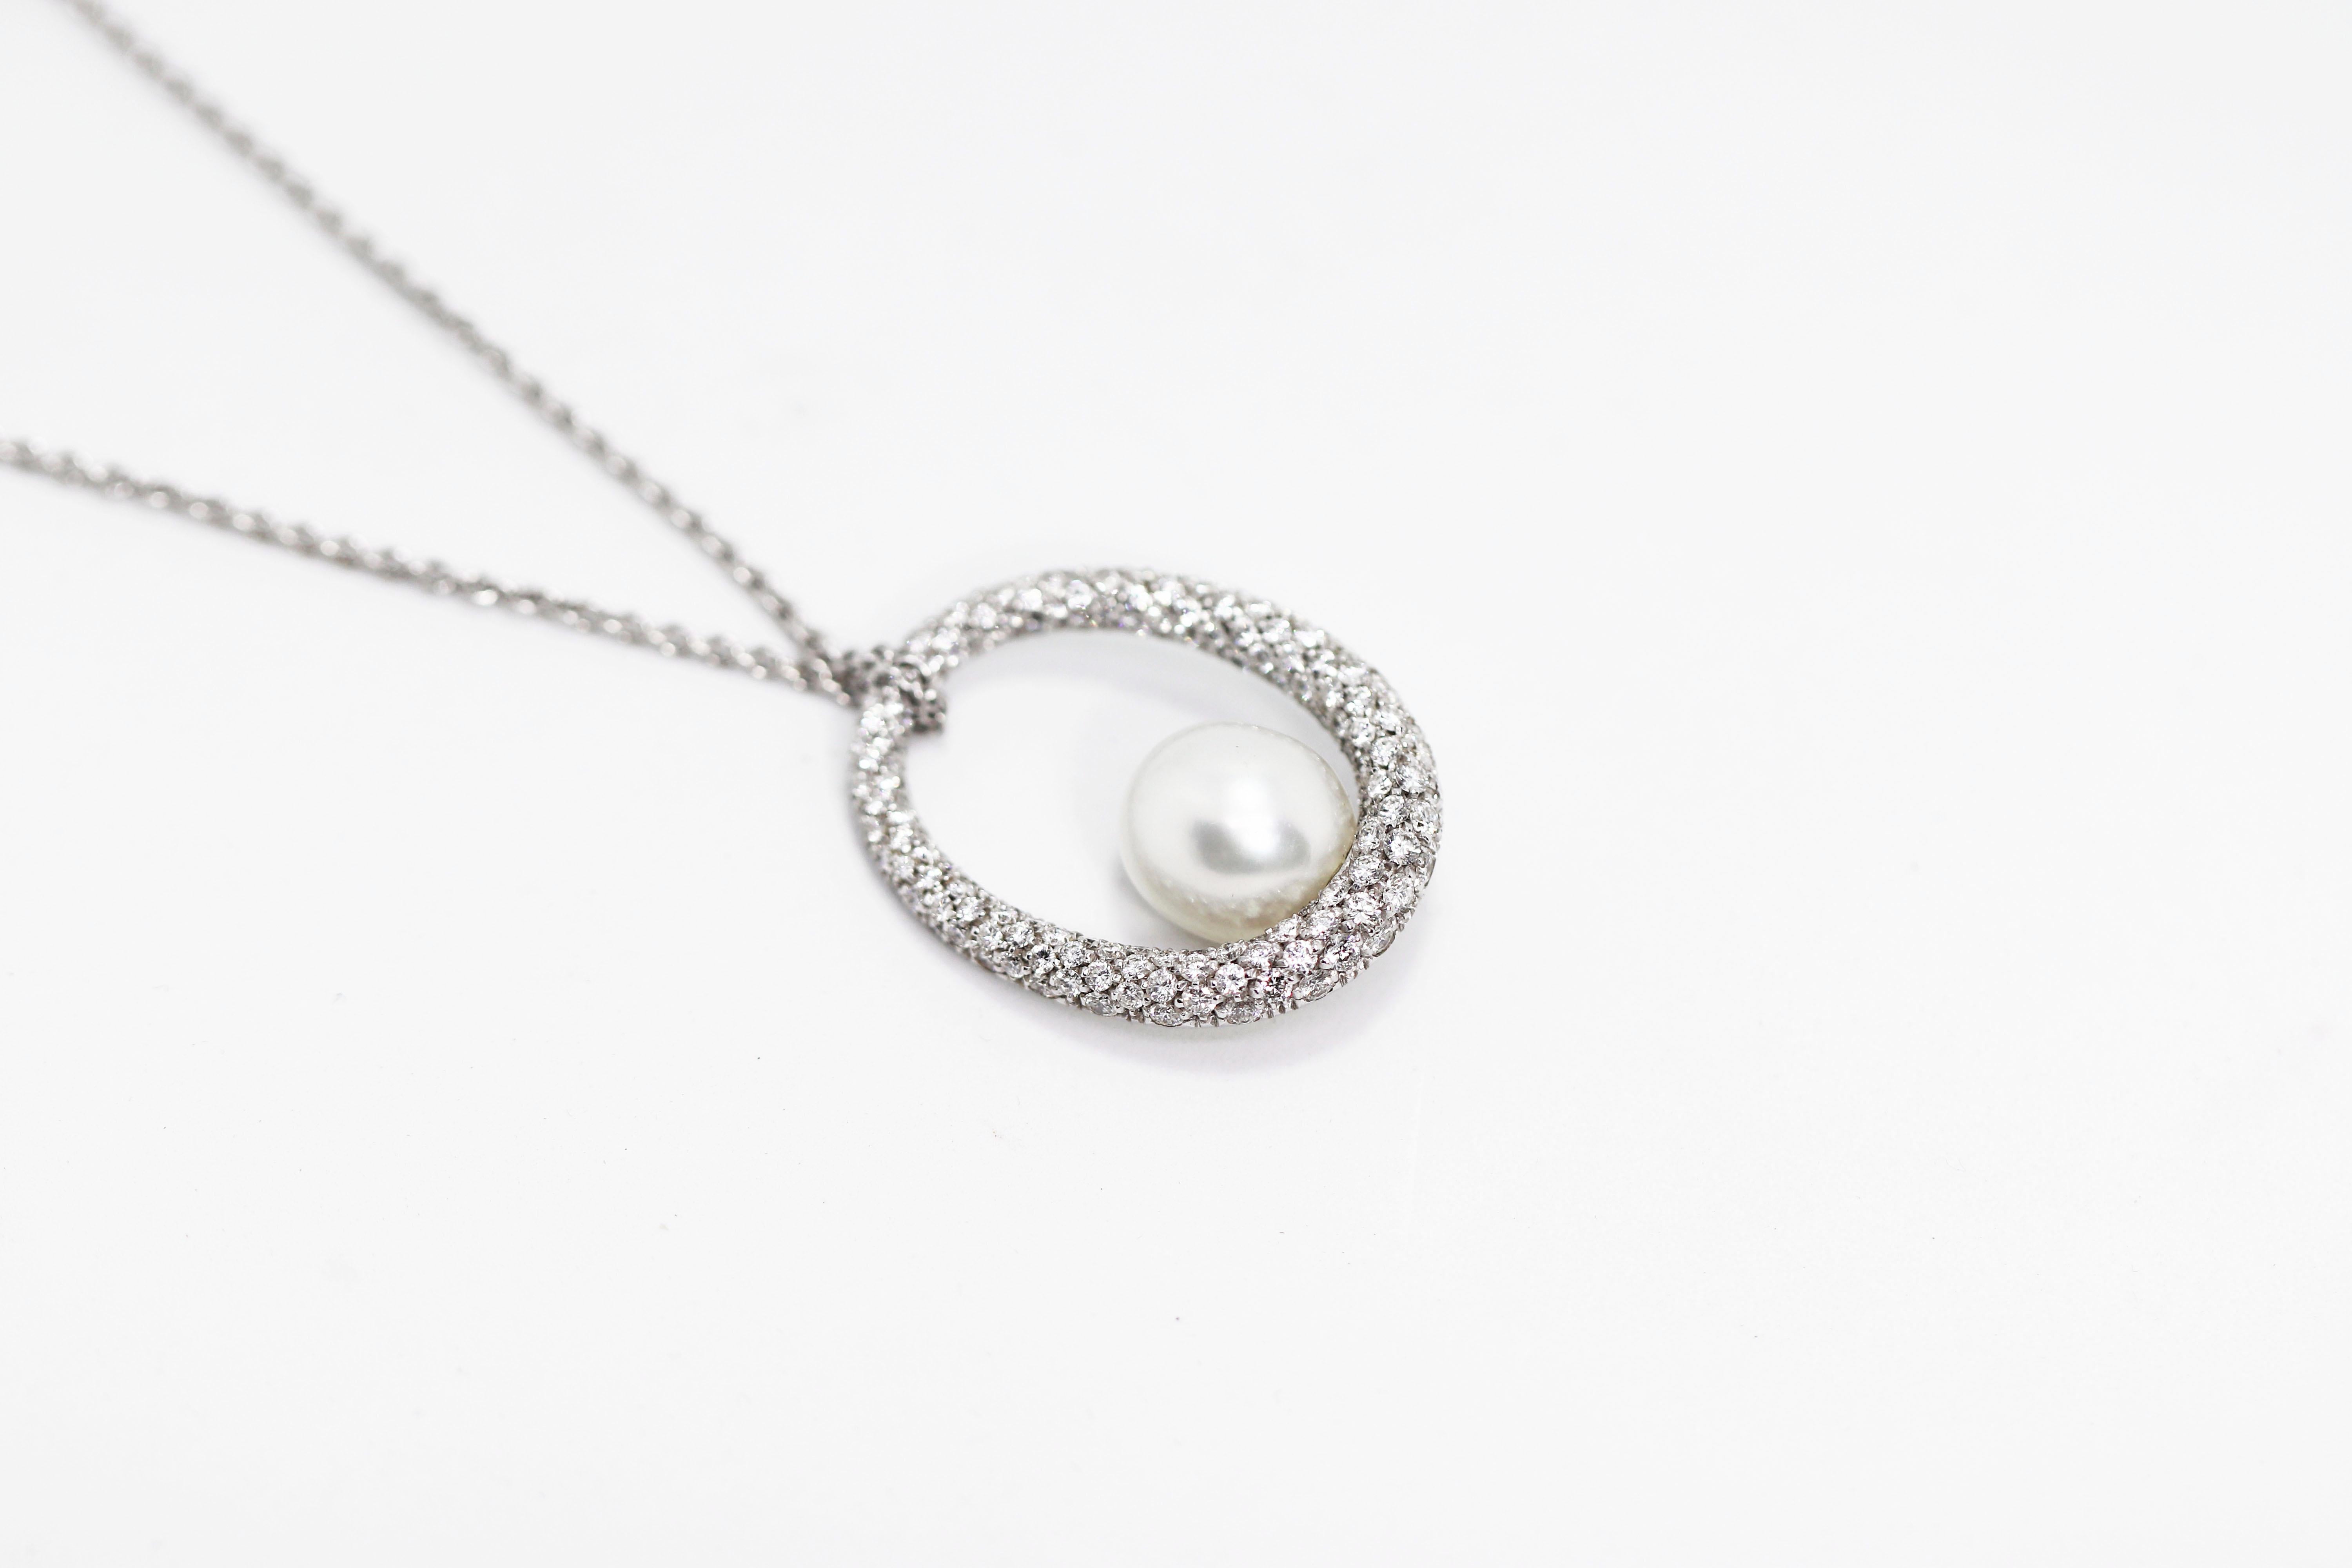 Modern Mikimoto Pearl and Diamond Pendant with 18 Carat White Gold Chain